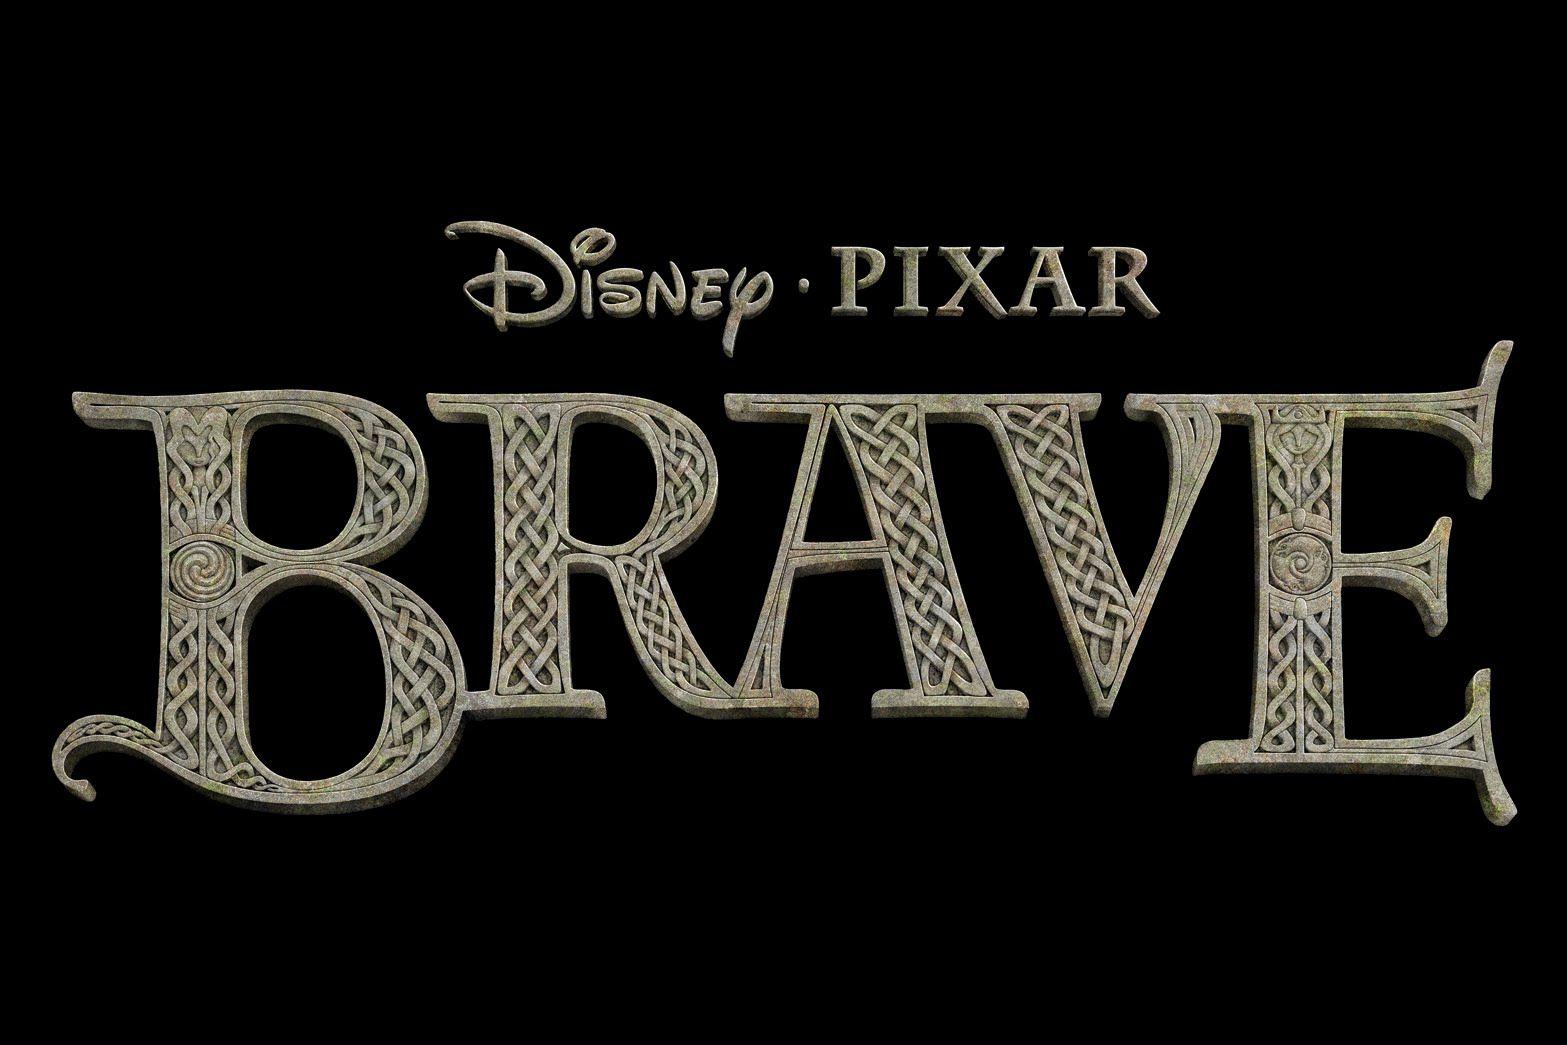 Disney Movie Title Logo - The “Brave” Situation. A Dreamer Walking